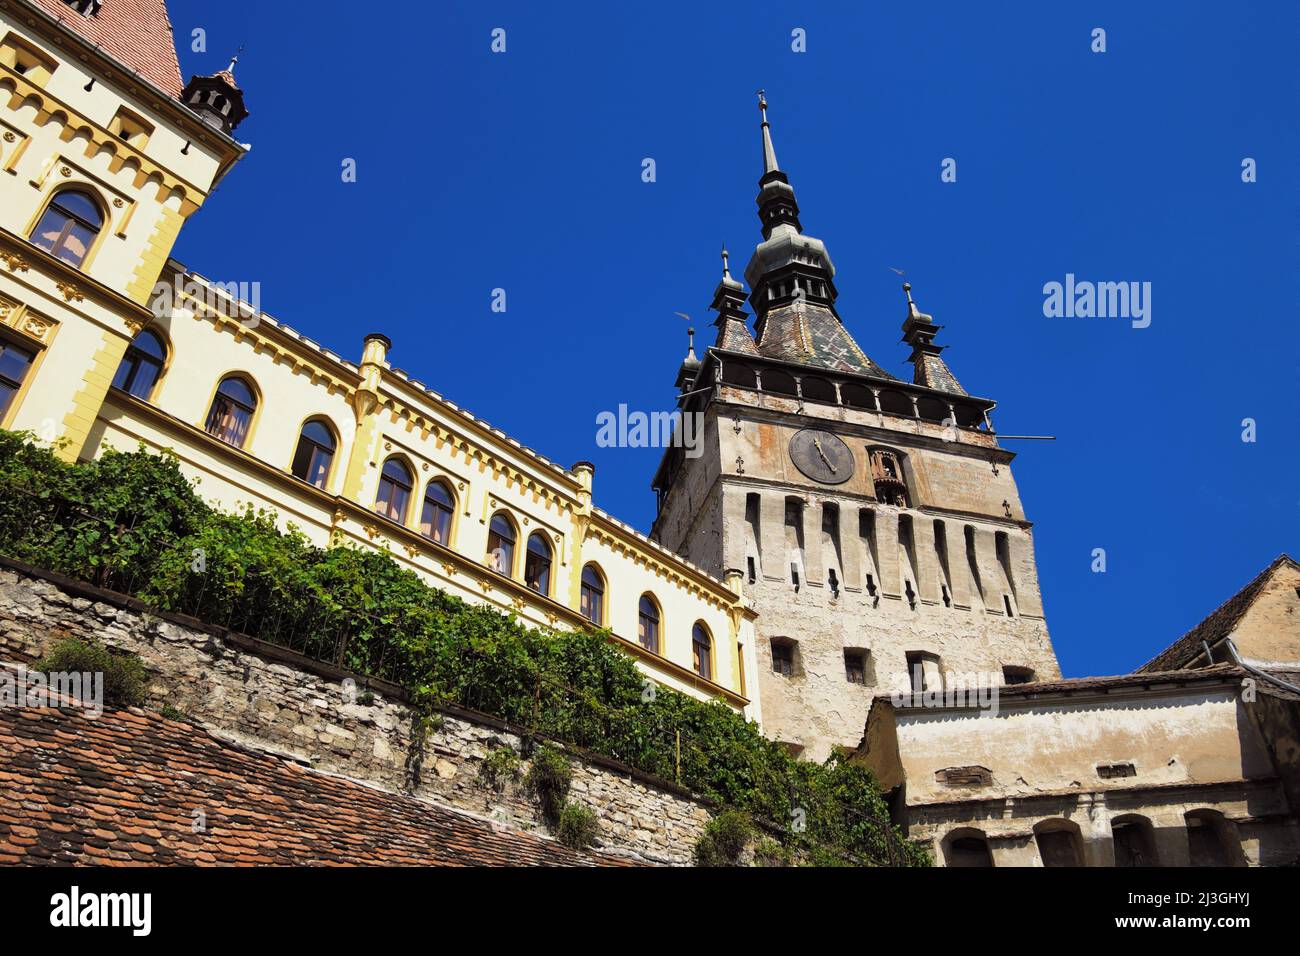 Sighisoara Clock Tower in medieval fortified town, Romania Stock Photo